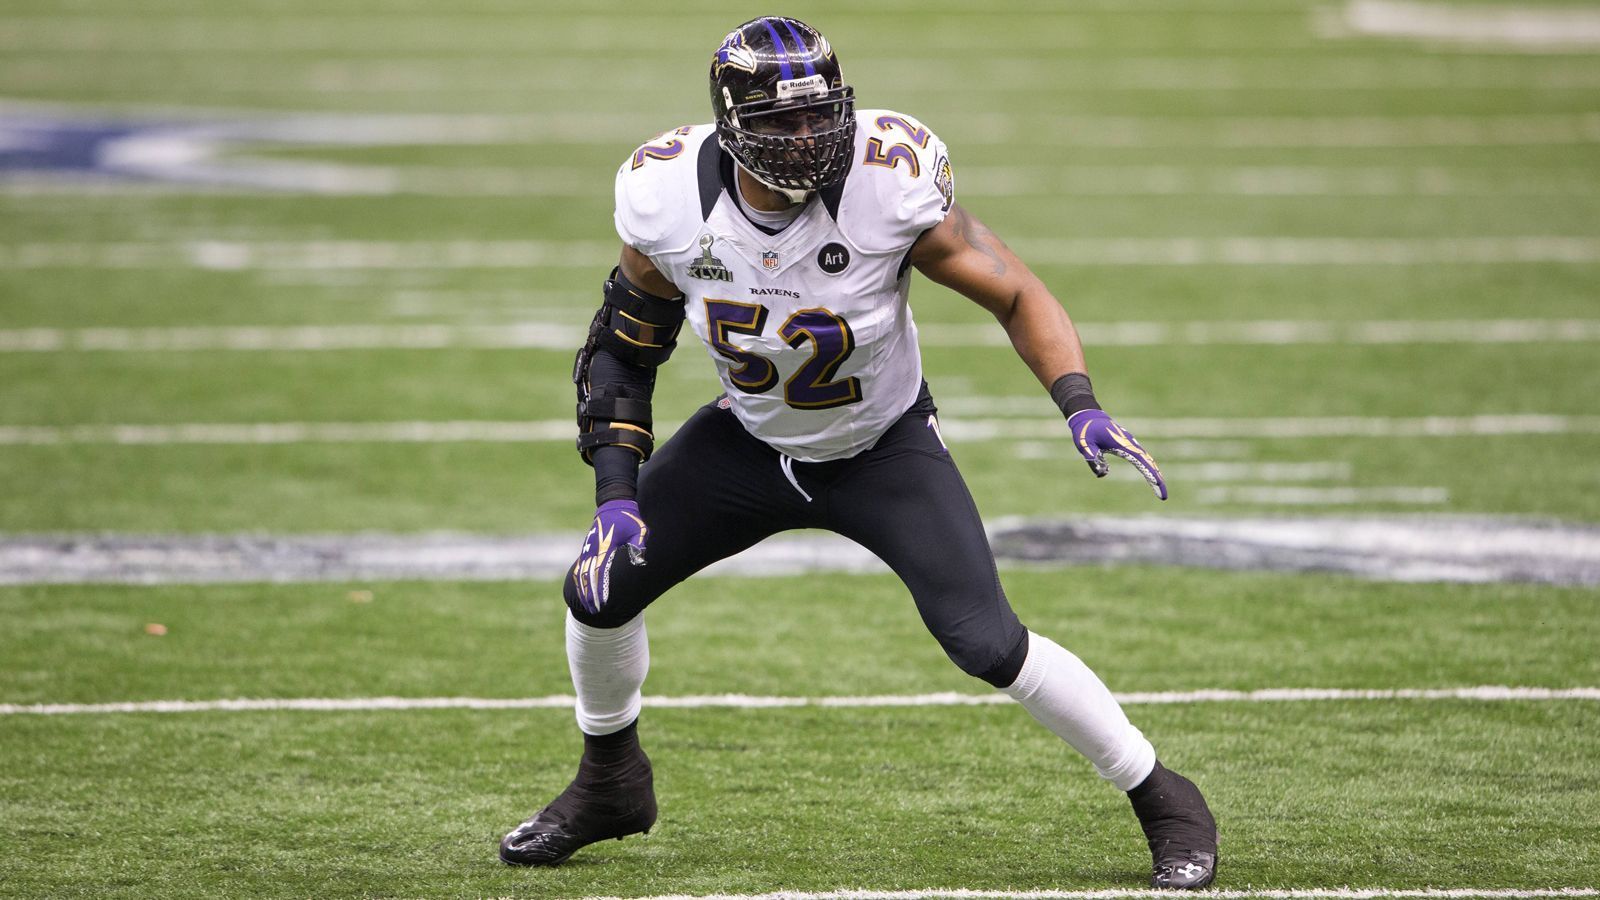 
                <strong>Ray Lewis</strong><br>
                Aktiv: 1996 - 2012Position: LinebackerTeam: Baltimore RavensErfolge: 2x Super Bowl-Sieger, 12x Pro Bowl, 2x Defensive Player of the Year
              